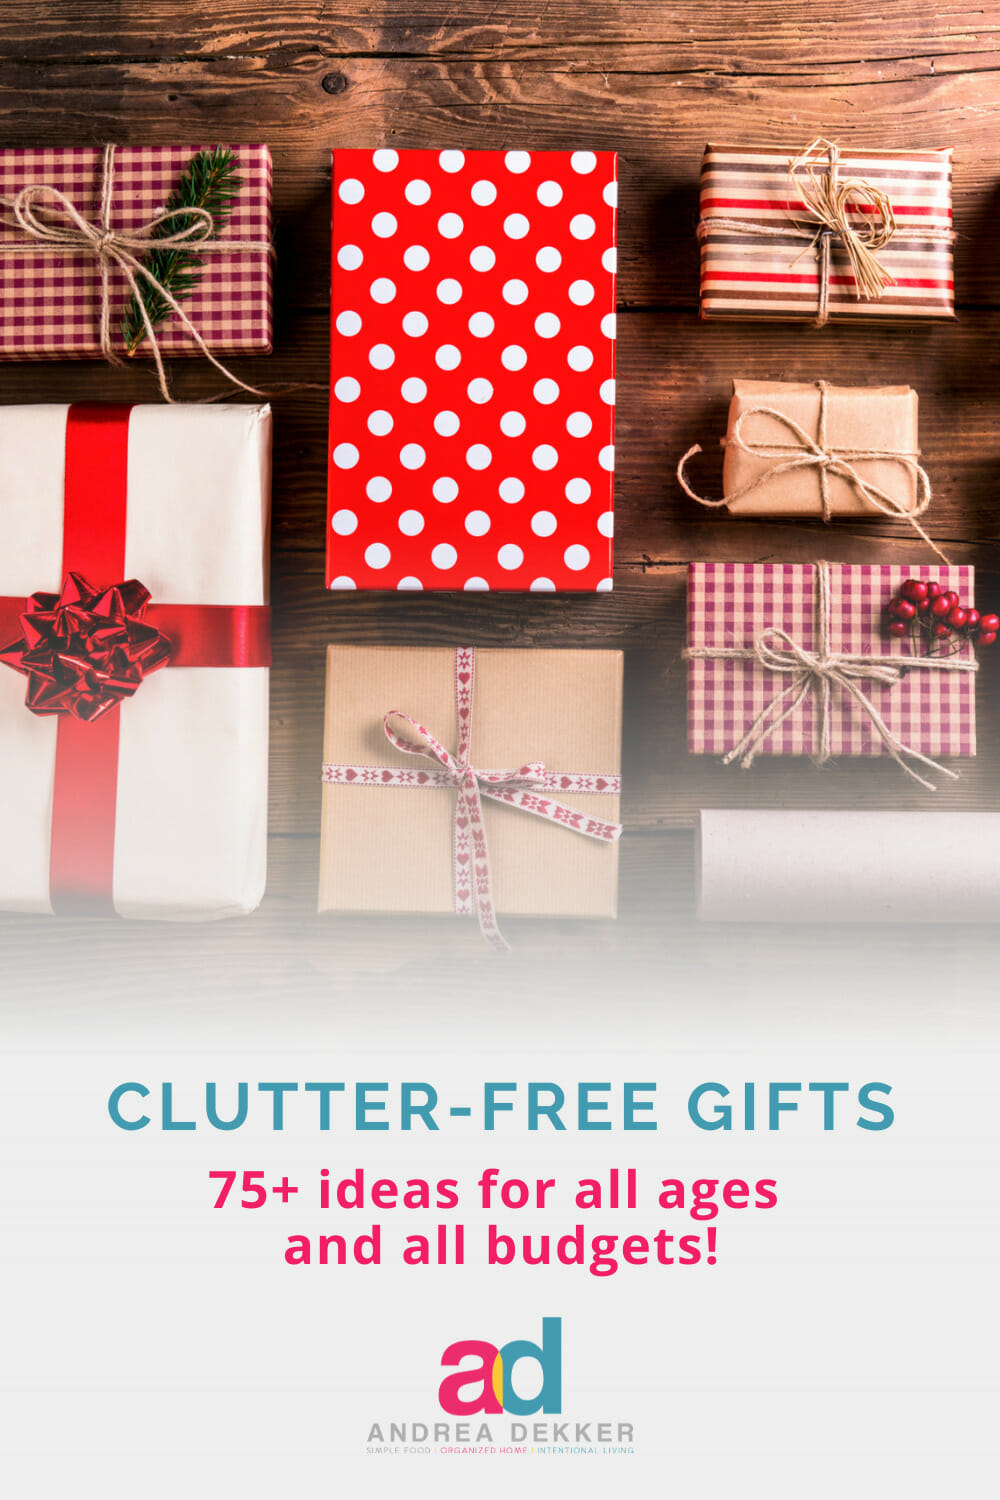 Check out this massive list of more than 75 clutter-free gift ideas for all ages and budgets. You're sure to find a memorable gift for everyone on your list! via @andreadekker